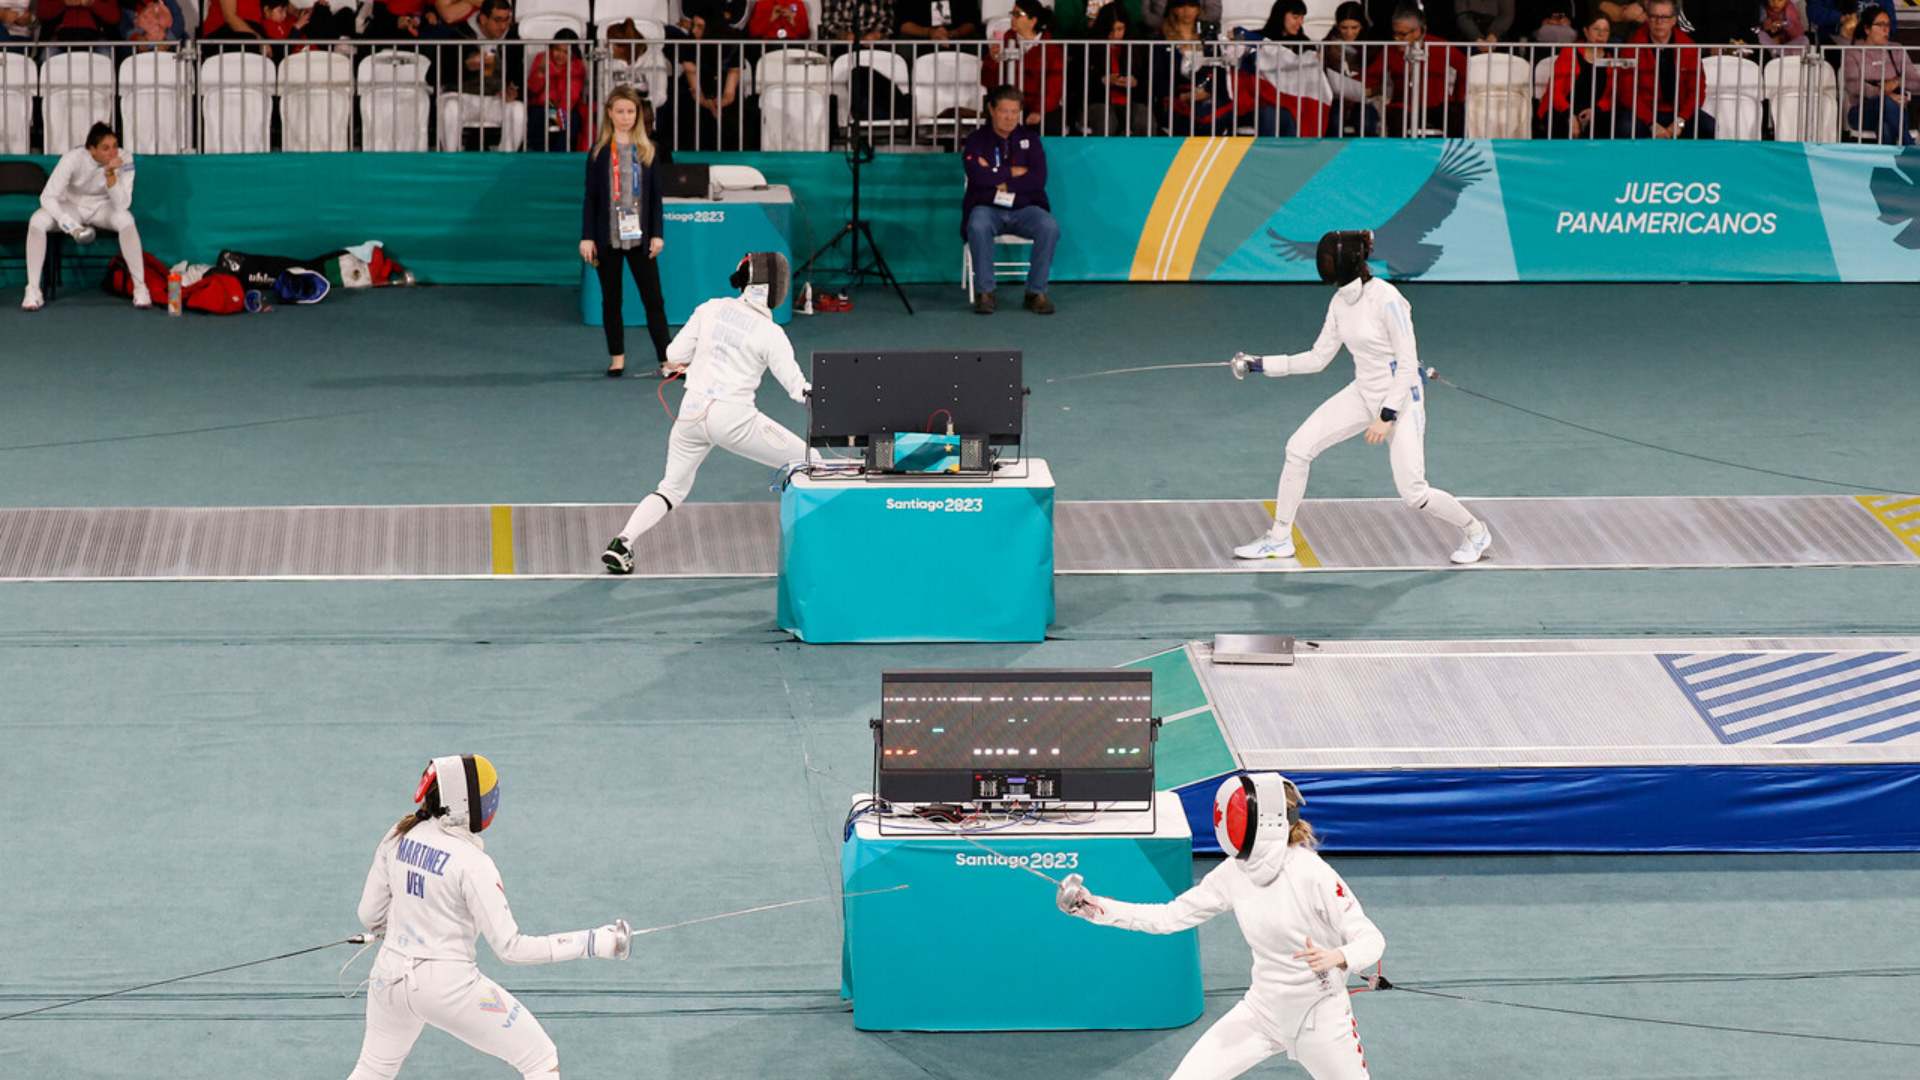 Fencing: Argentina's Di Tella defeats world’s number three and dreams of gold